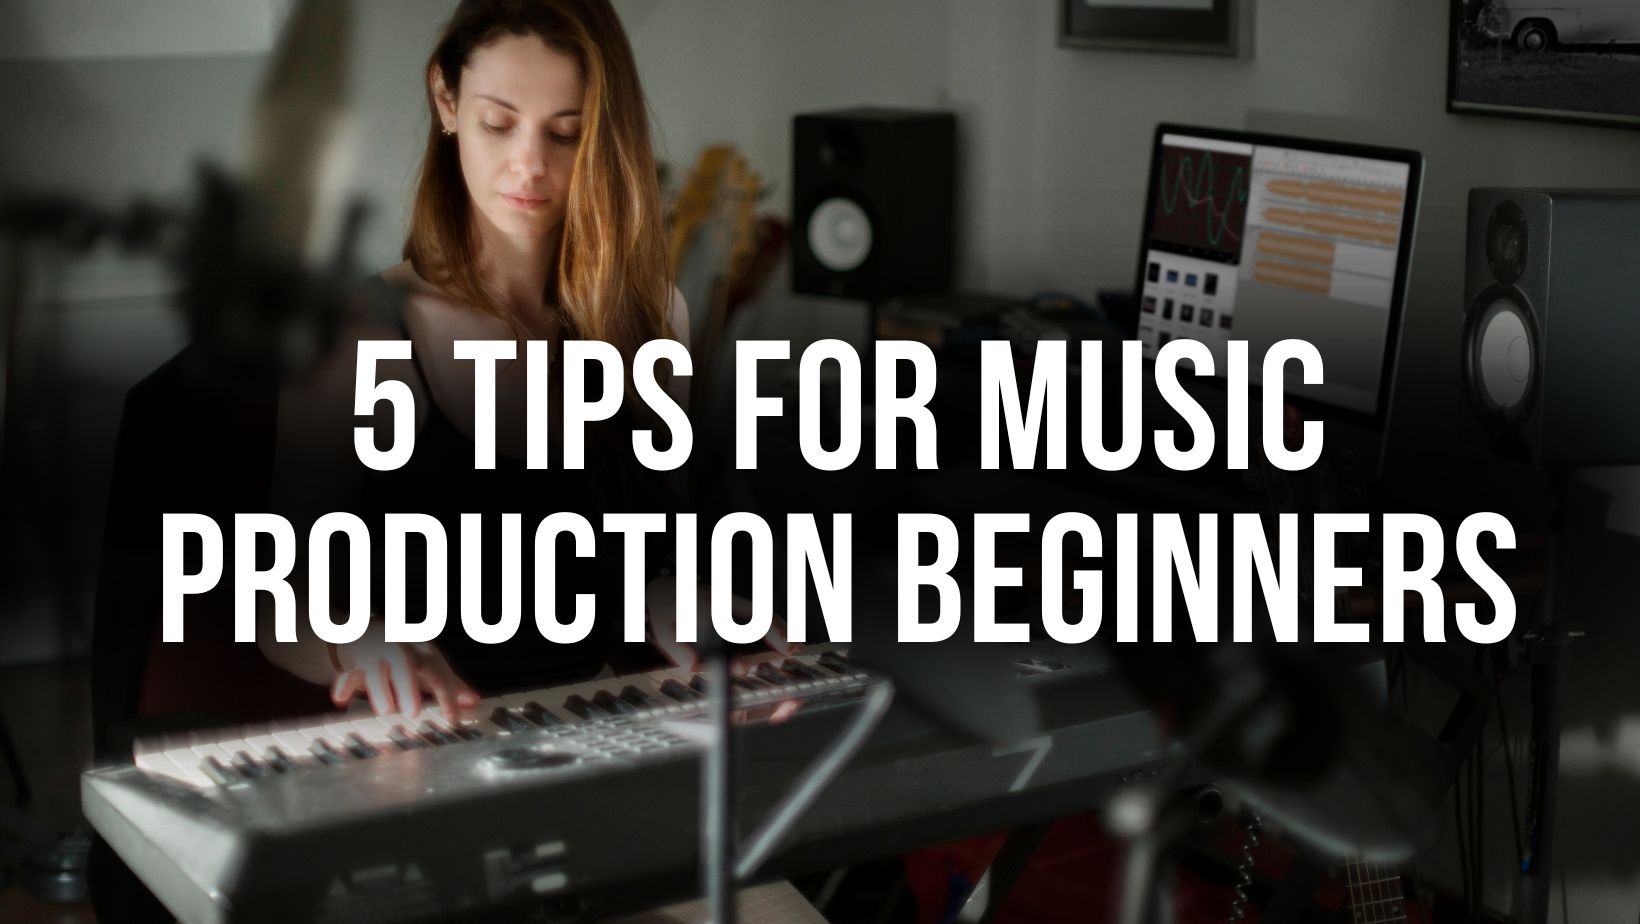 5 Essential Tips for Music Production Beginners